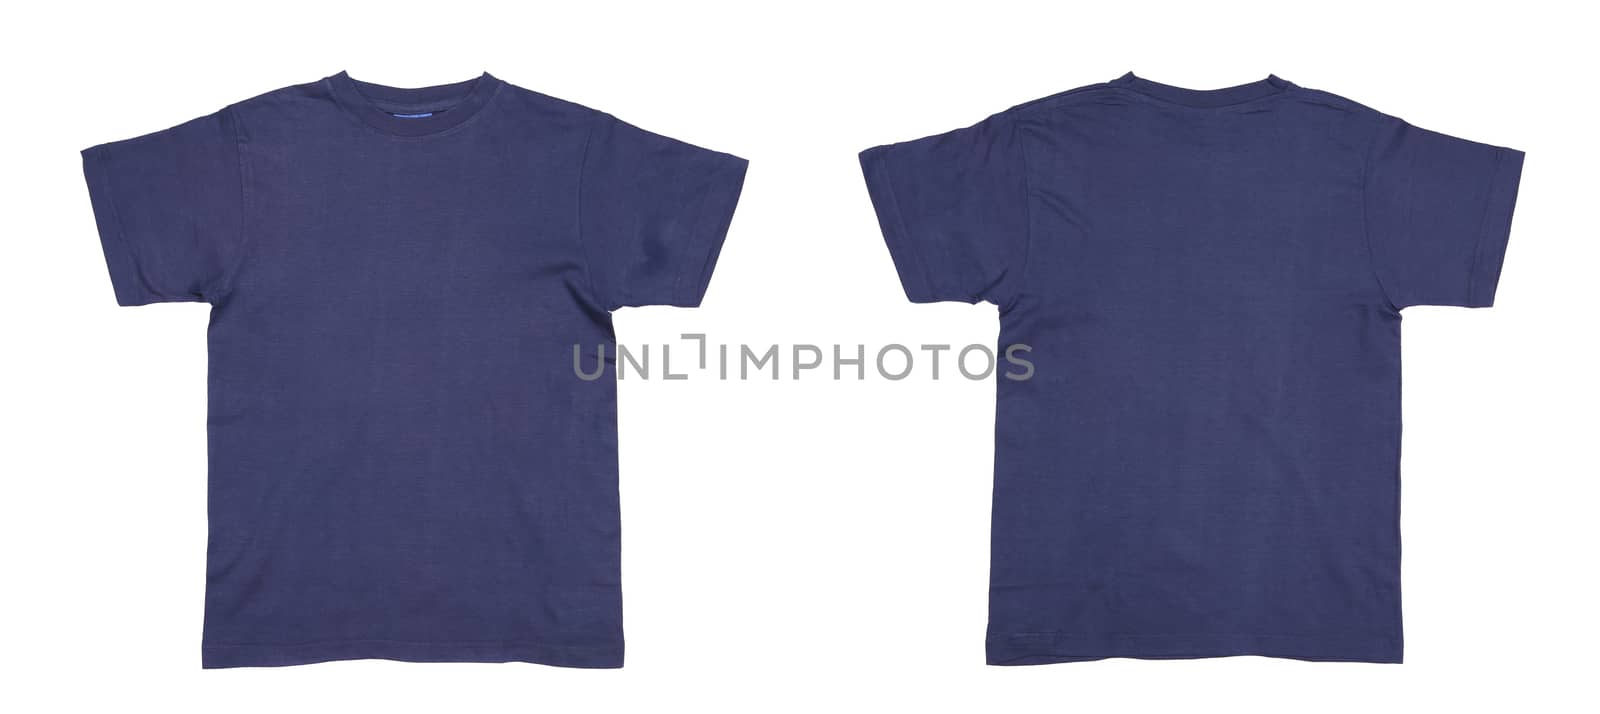 Men's blue T-shirt. Isolated on a white background.